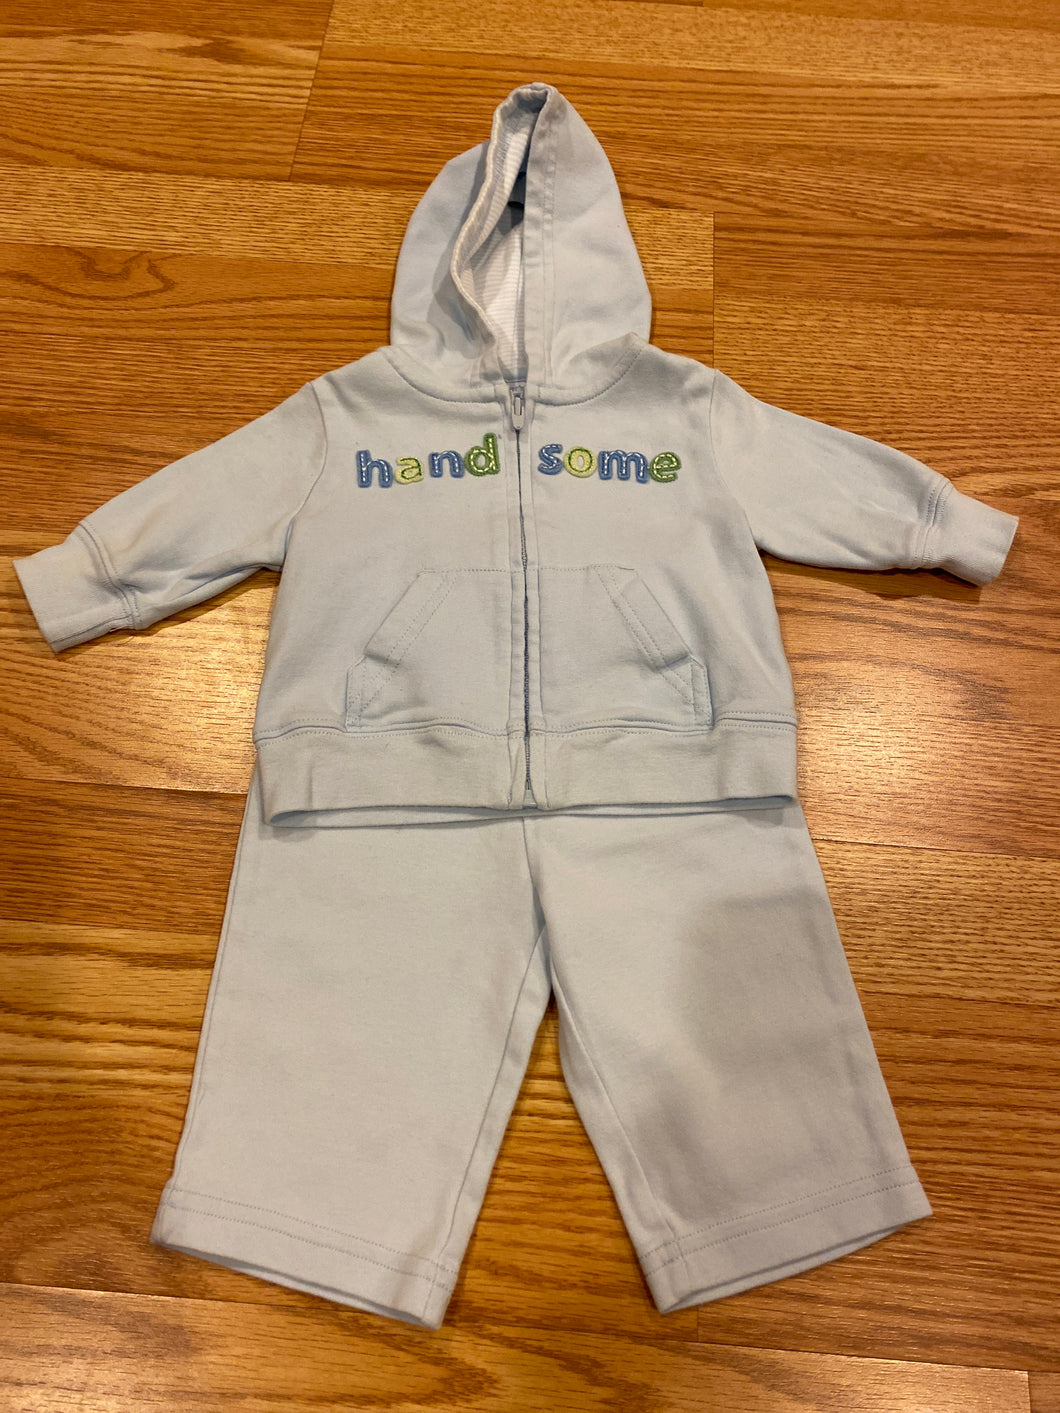 Carter’s 2 Piece Hoodie & Sweatpants Set - Very Good Condition!  3 months